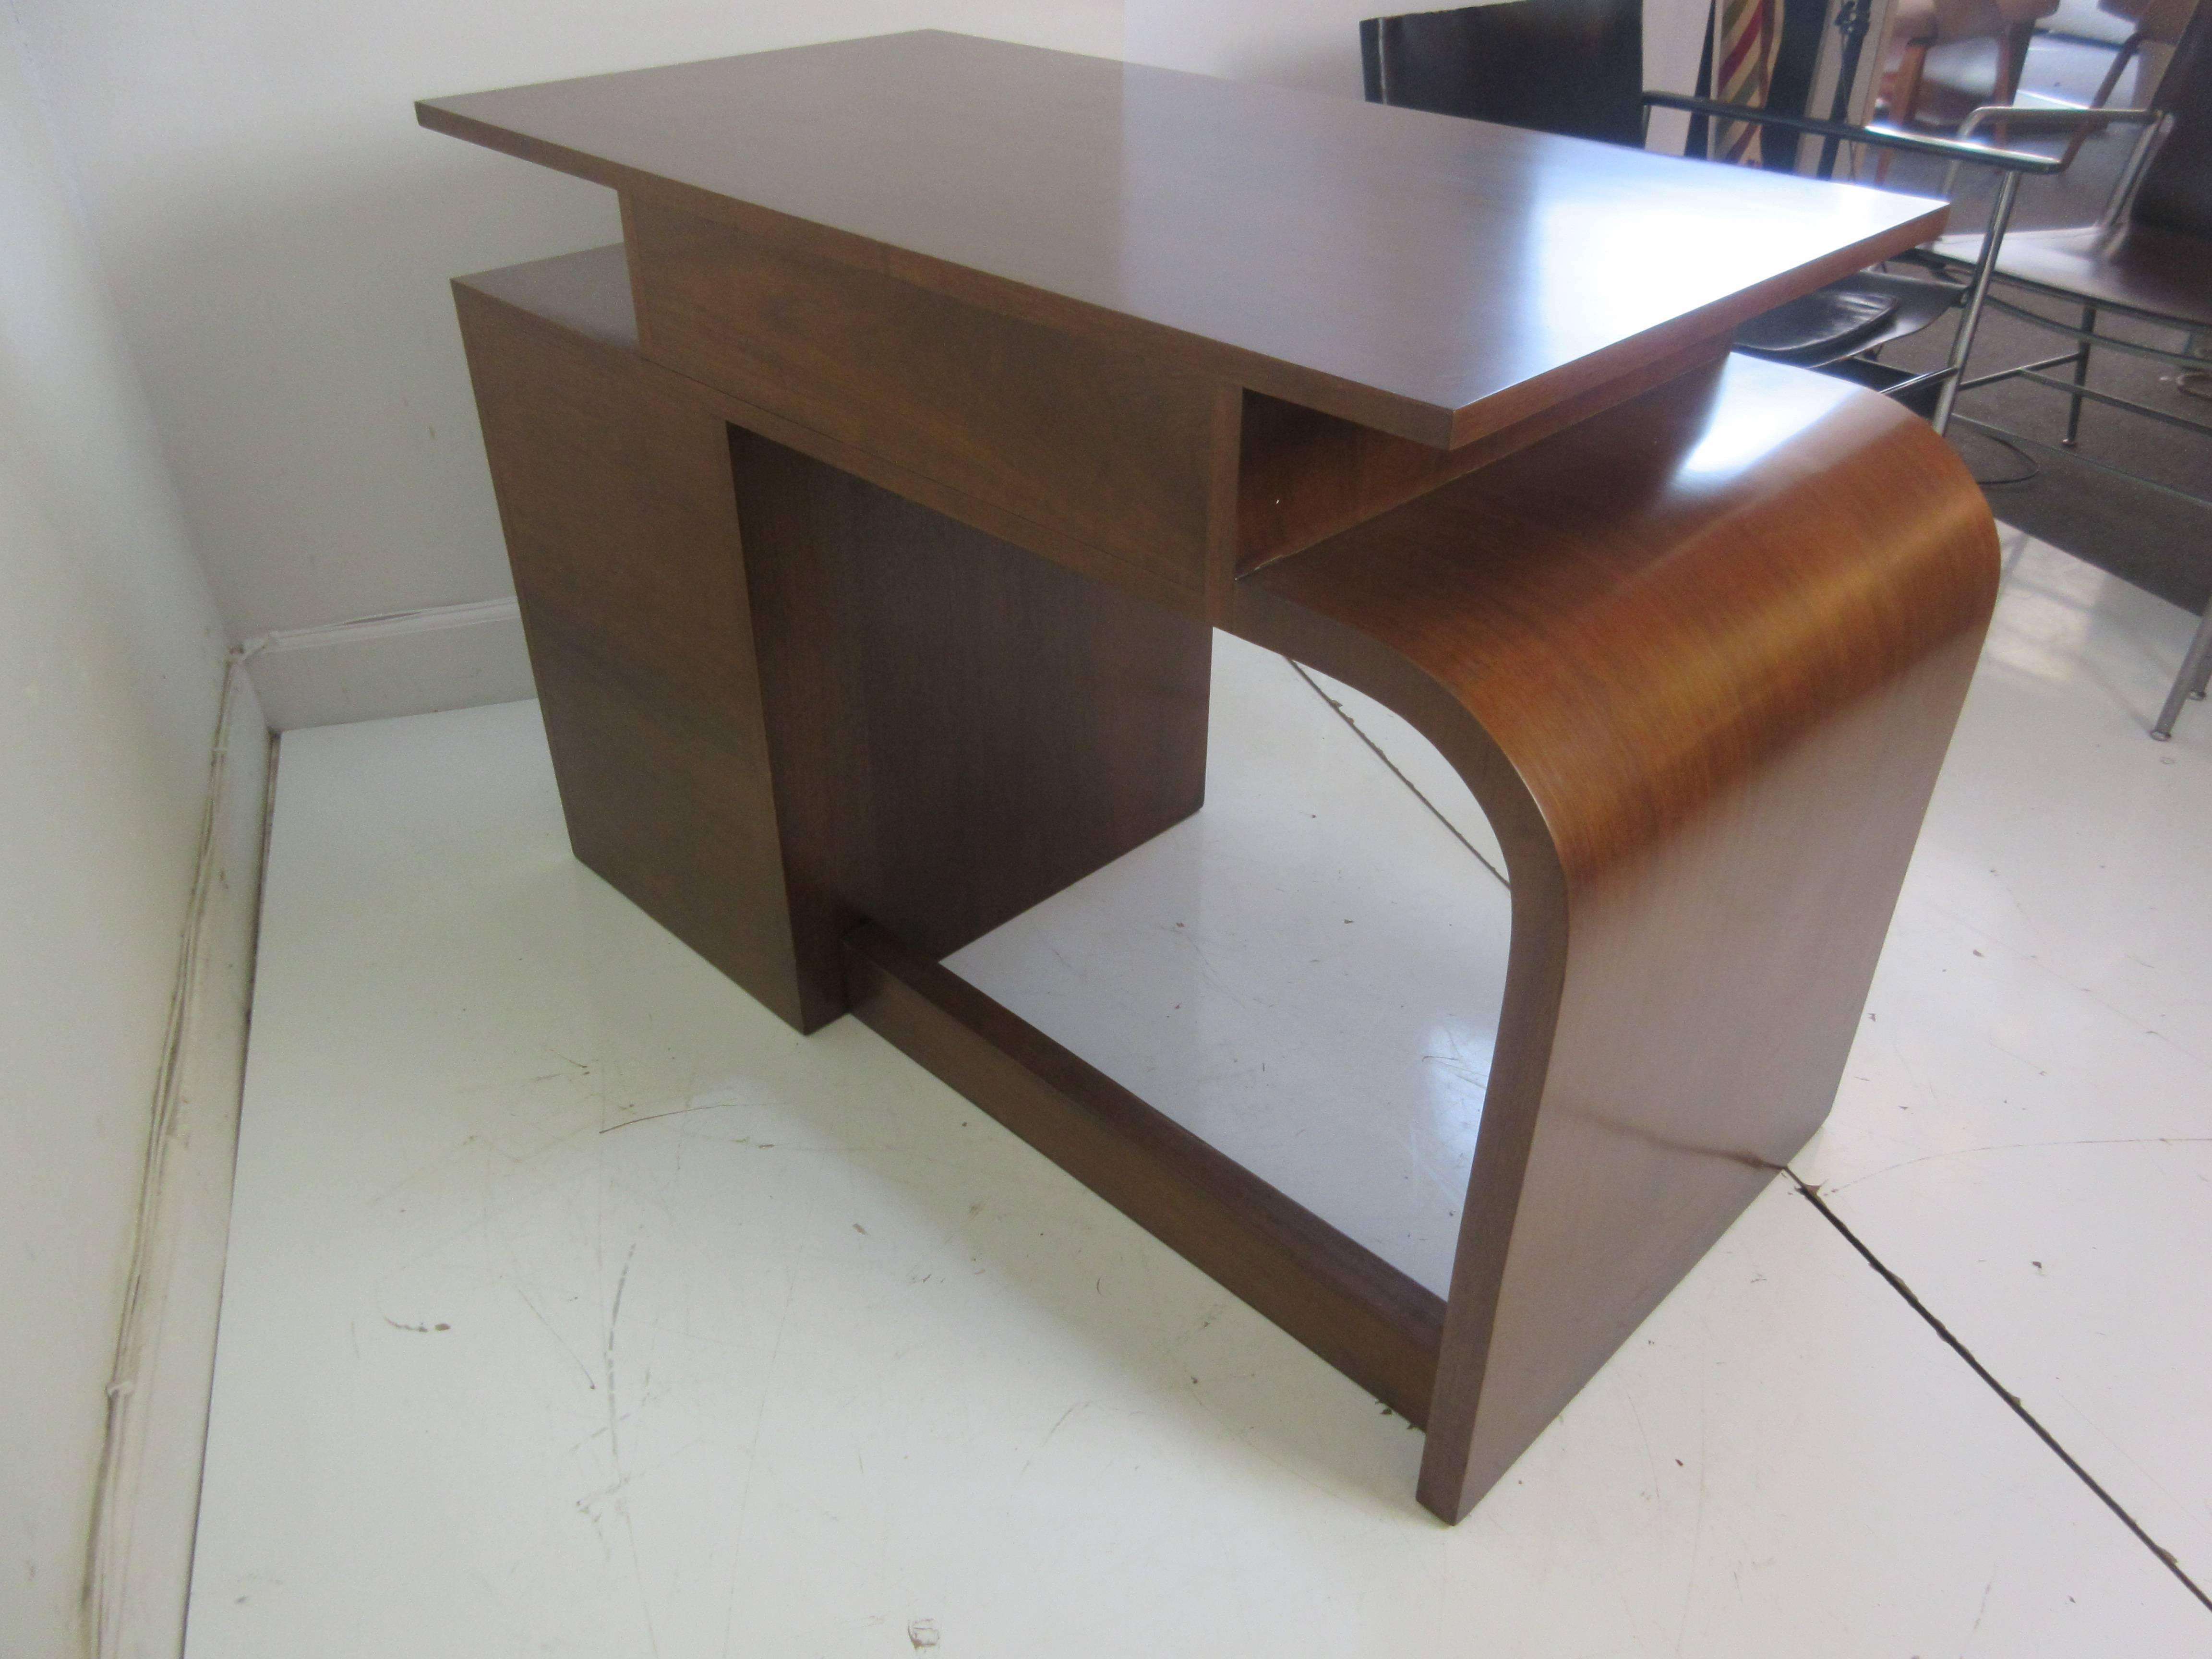 Donald Deskey for Widdicomb walnut asymmetrical desk with chrome pulls and black wood shadow pieces behind the handles. Three side drawers and one bigger top drawer. Very Unique design with a curved side leg, and open area to the right. Desk is